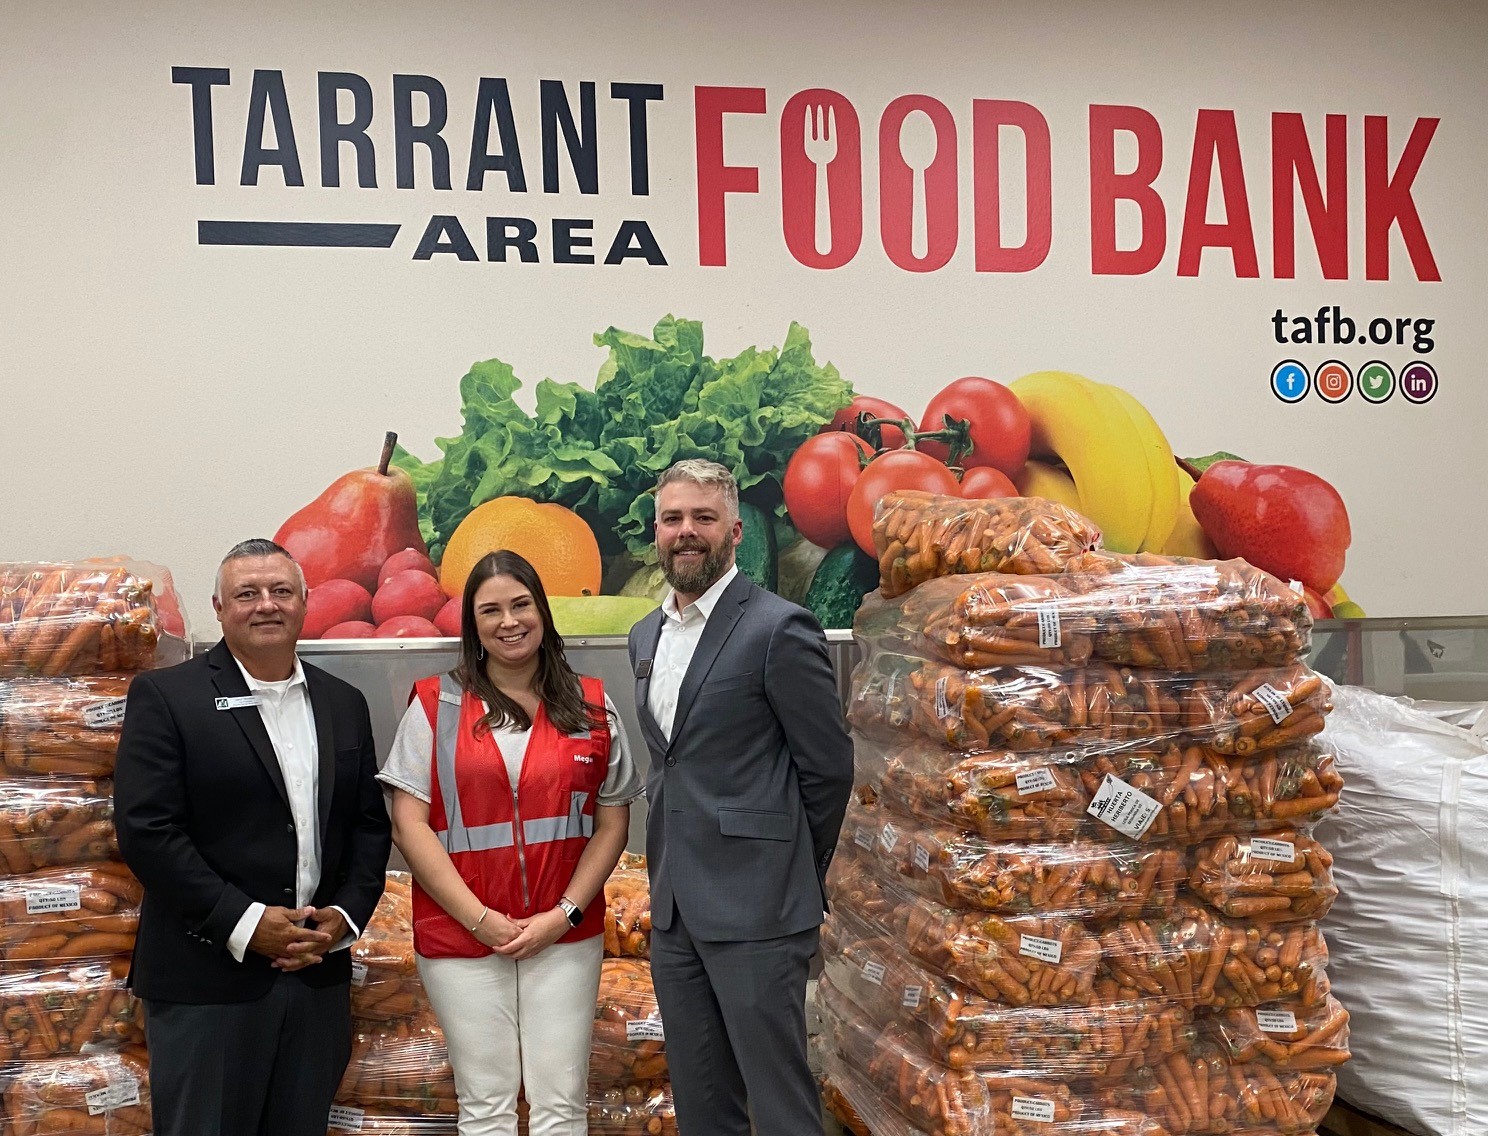 Tarrant Area Food Bank recently received a $7,770.00 donation from WCF.